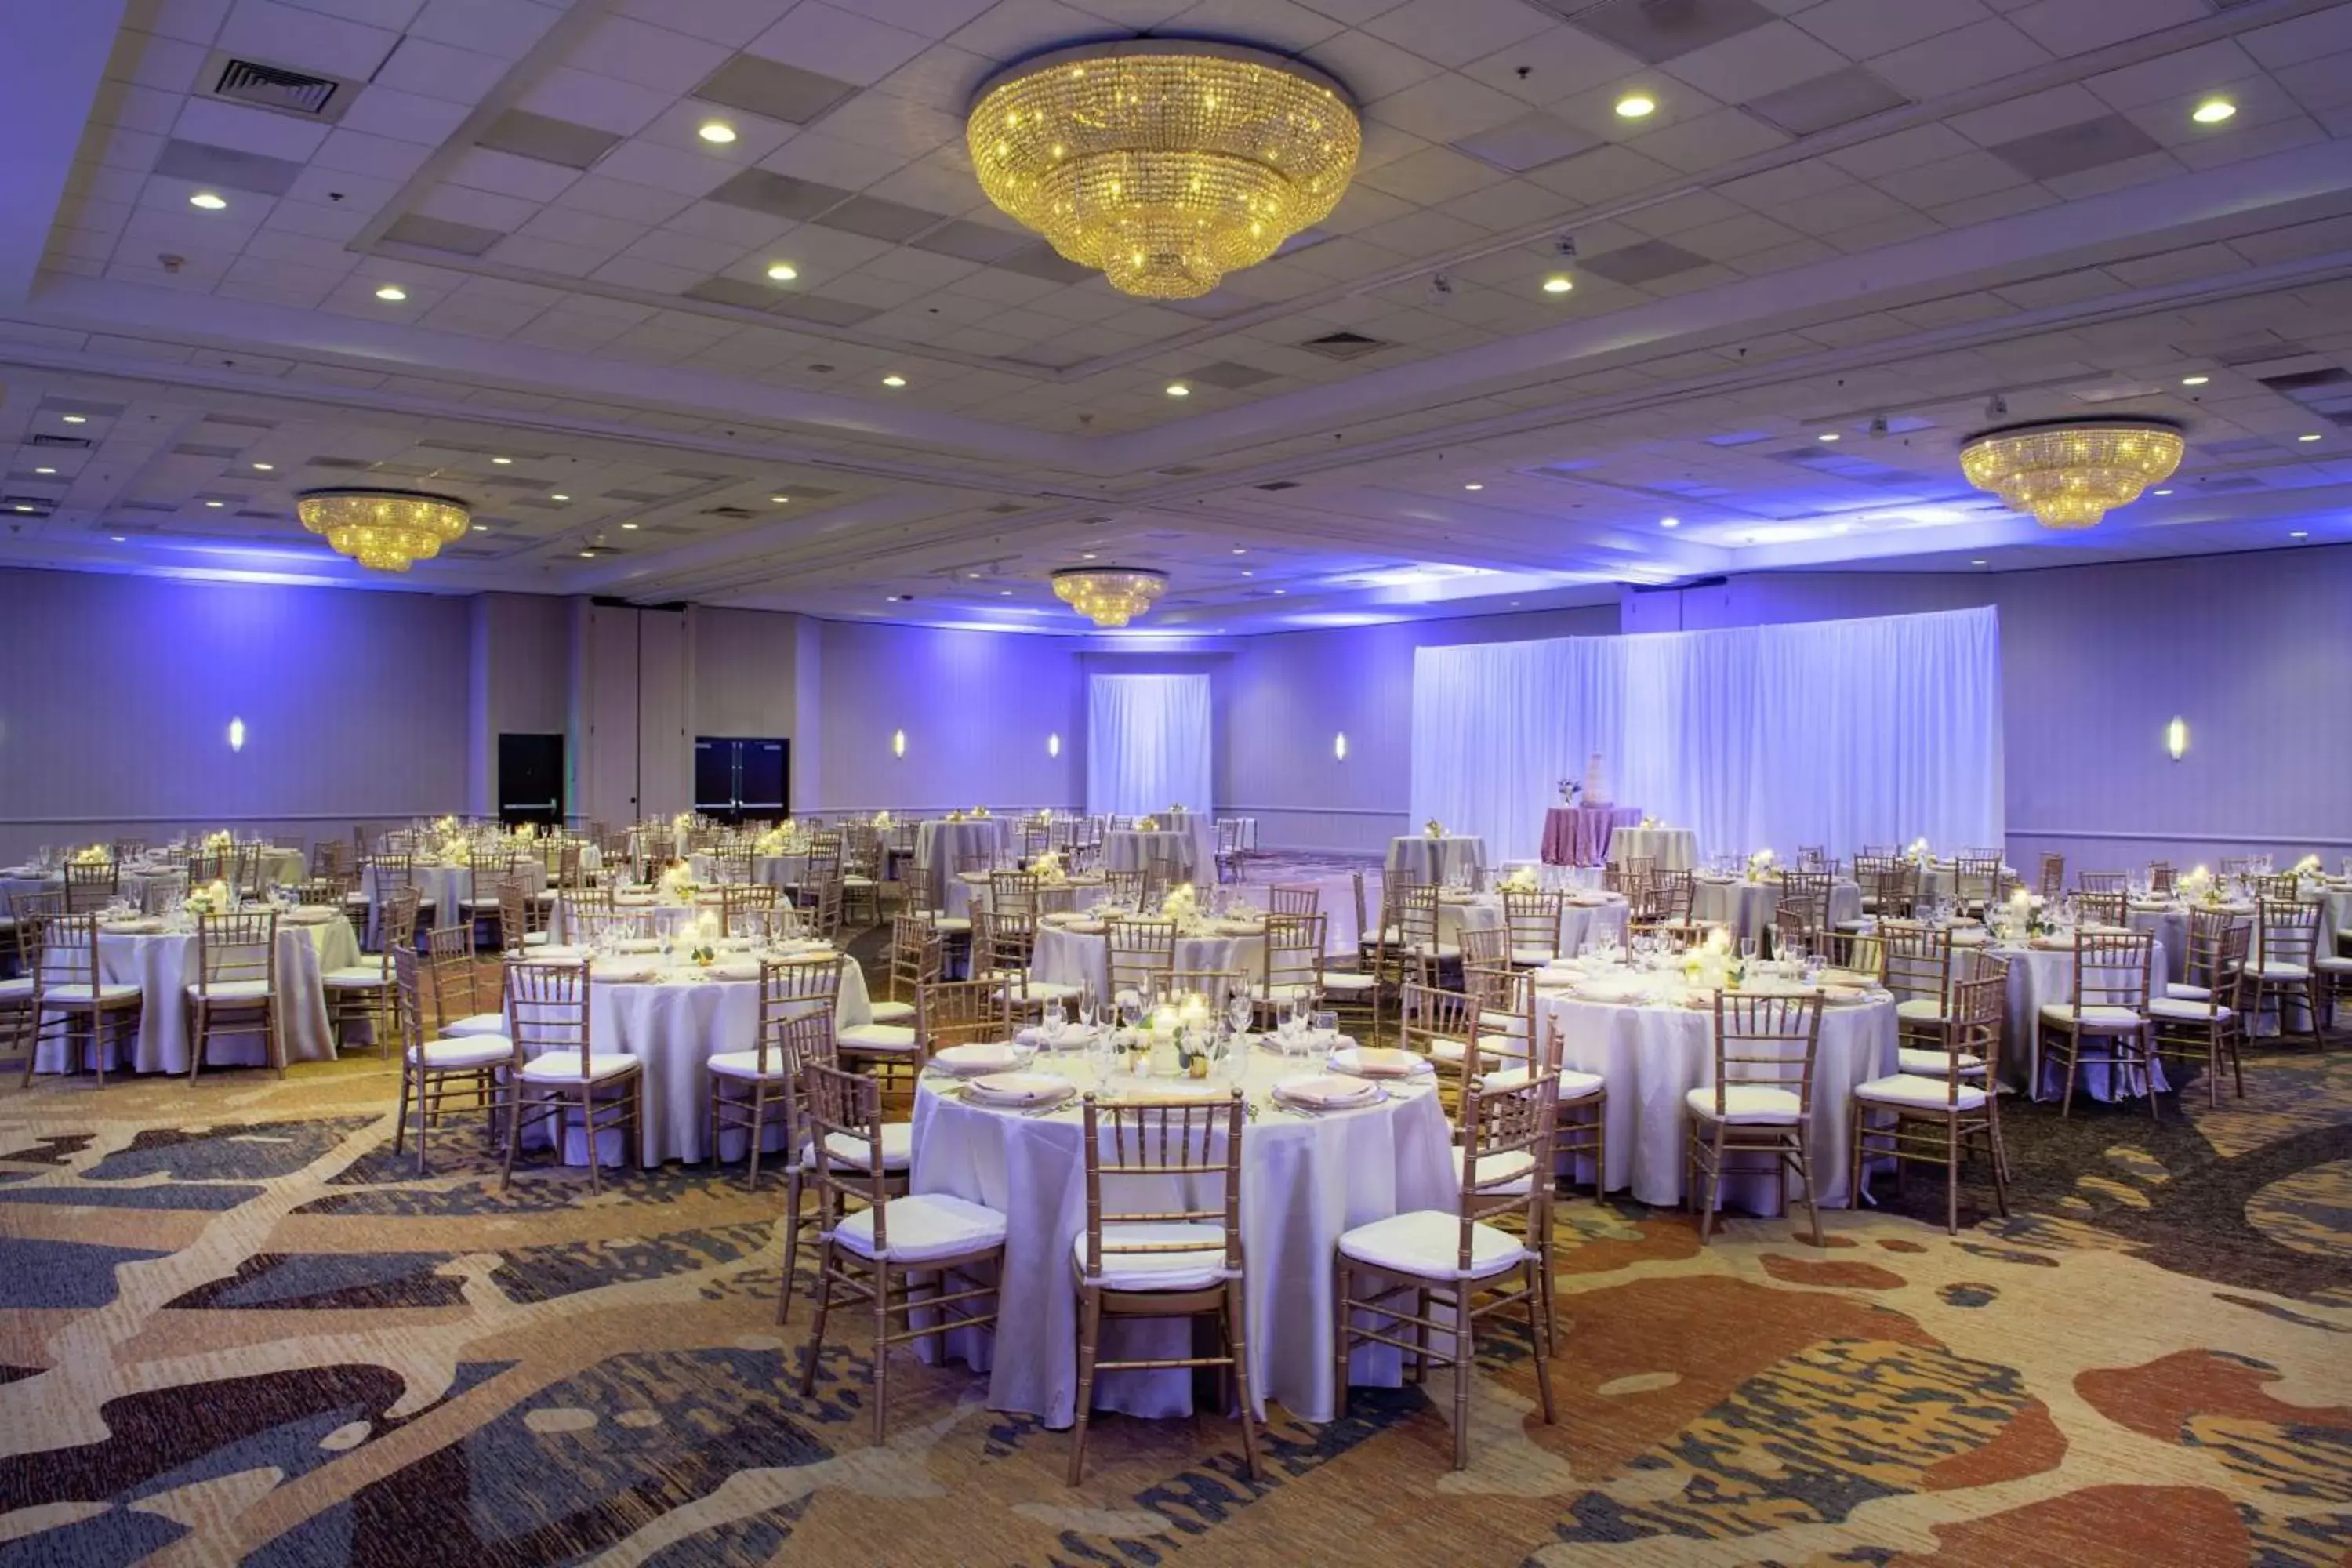 Meeting/conference room, Banquet Facilities in Embassy Suites by Hilton Portland Washington Square